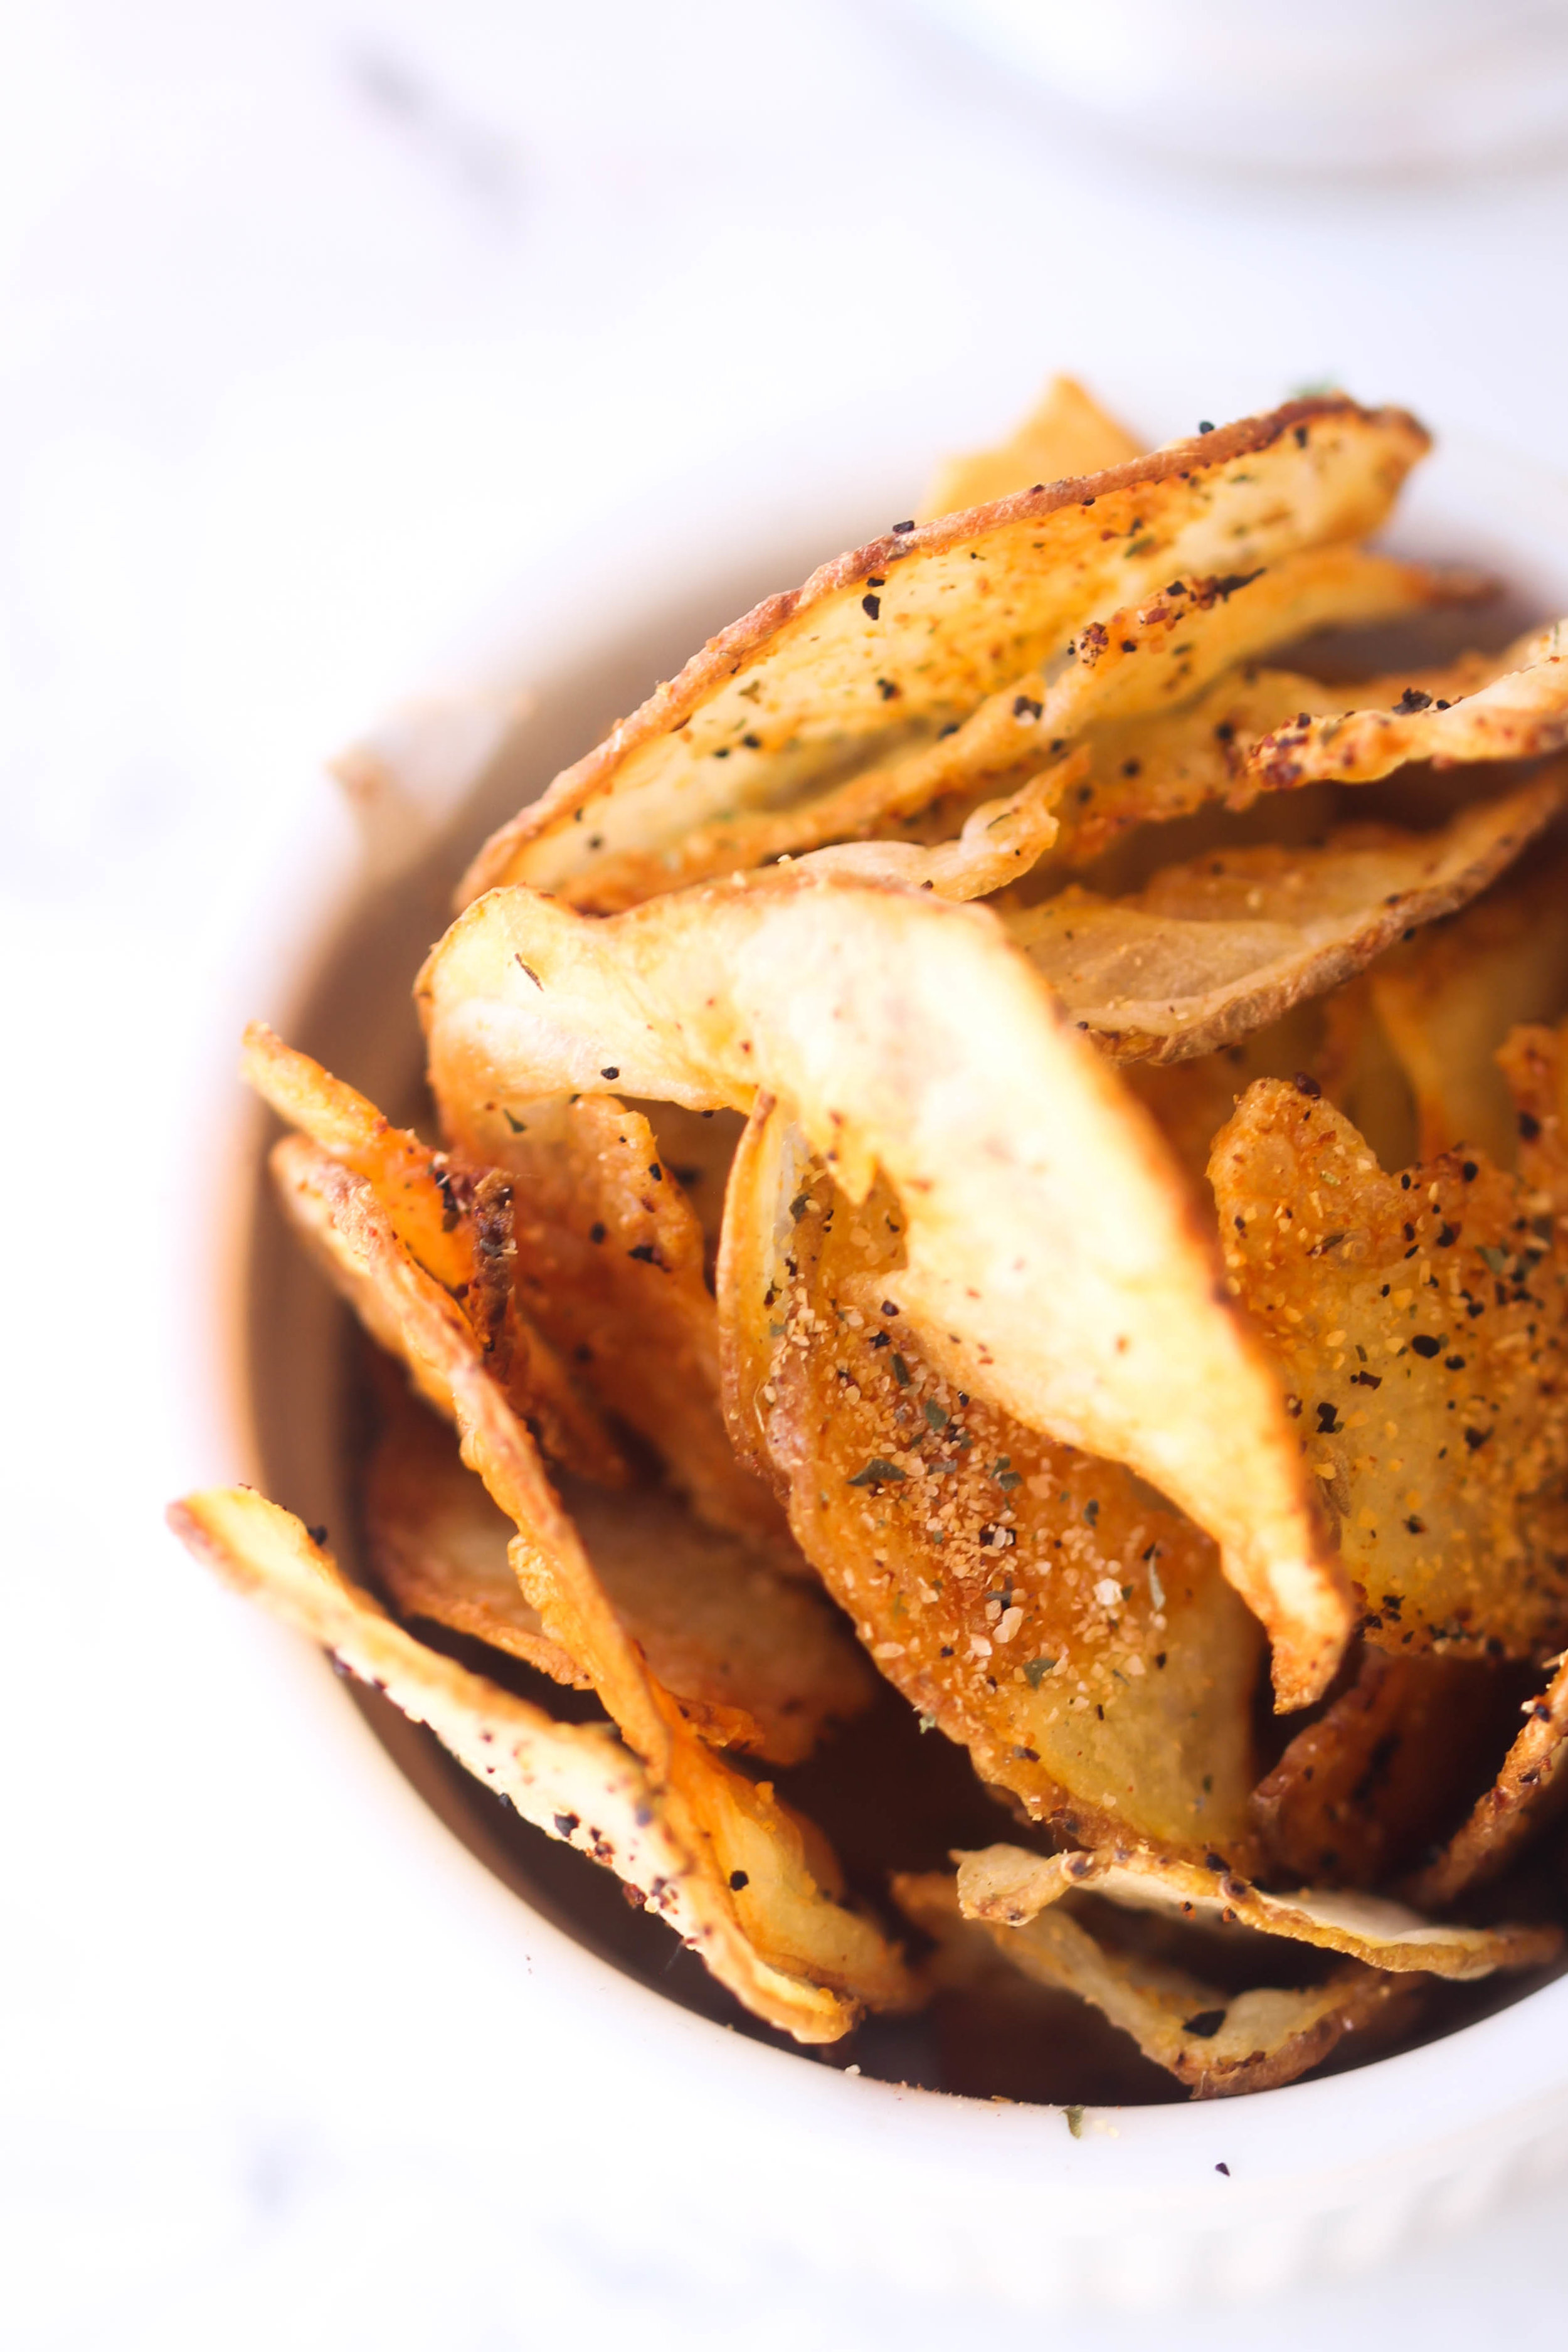 Crispy Baked Potato Chips are a healthier alternative to store-bought potato chips. They take 30 minutes or less and you can easily customize your spices.